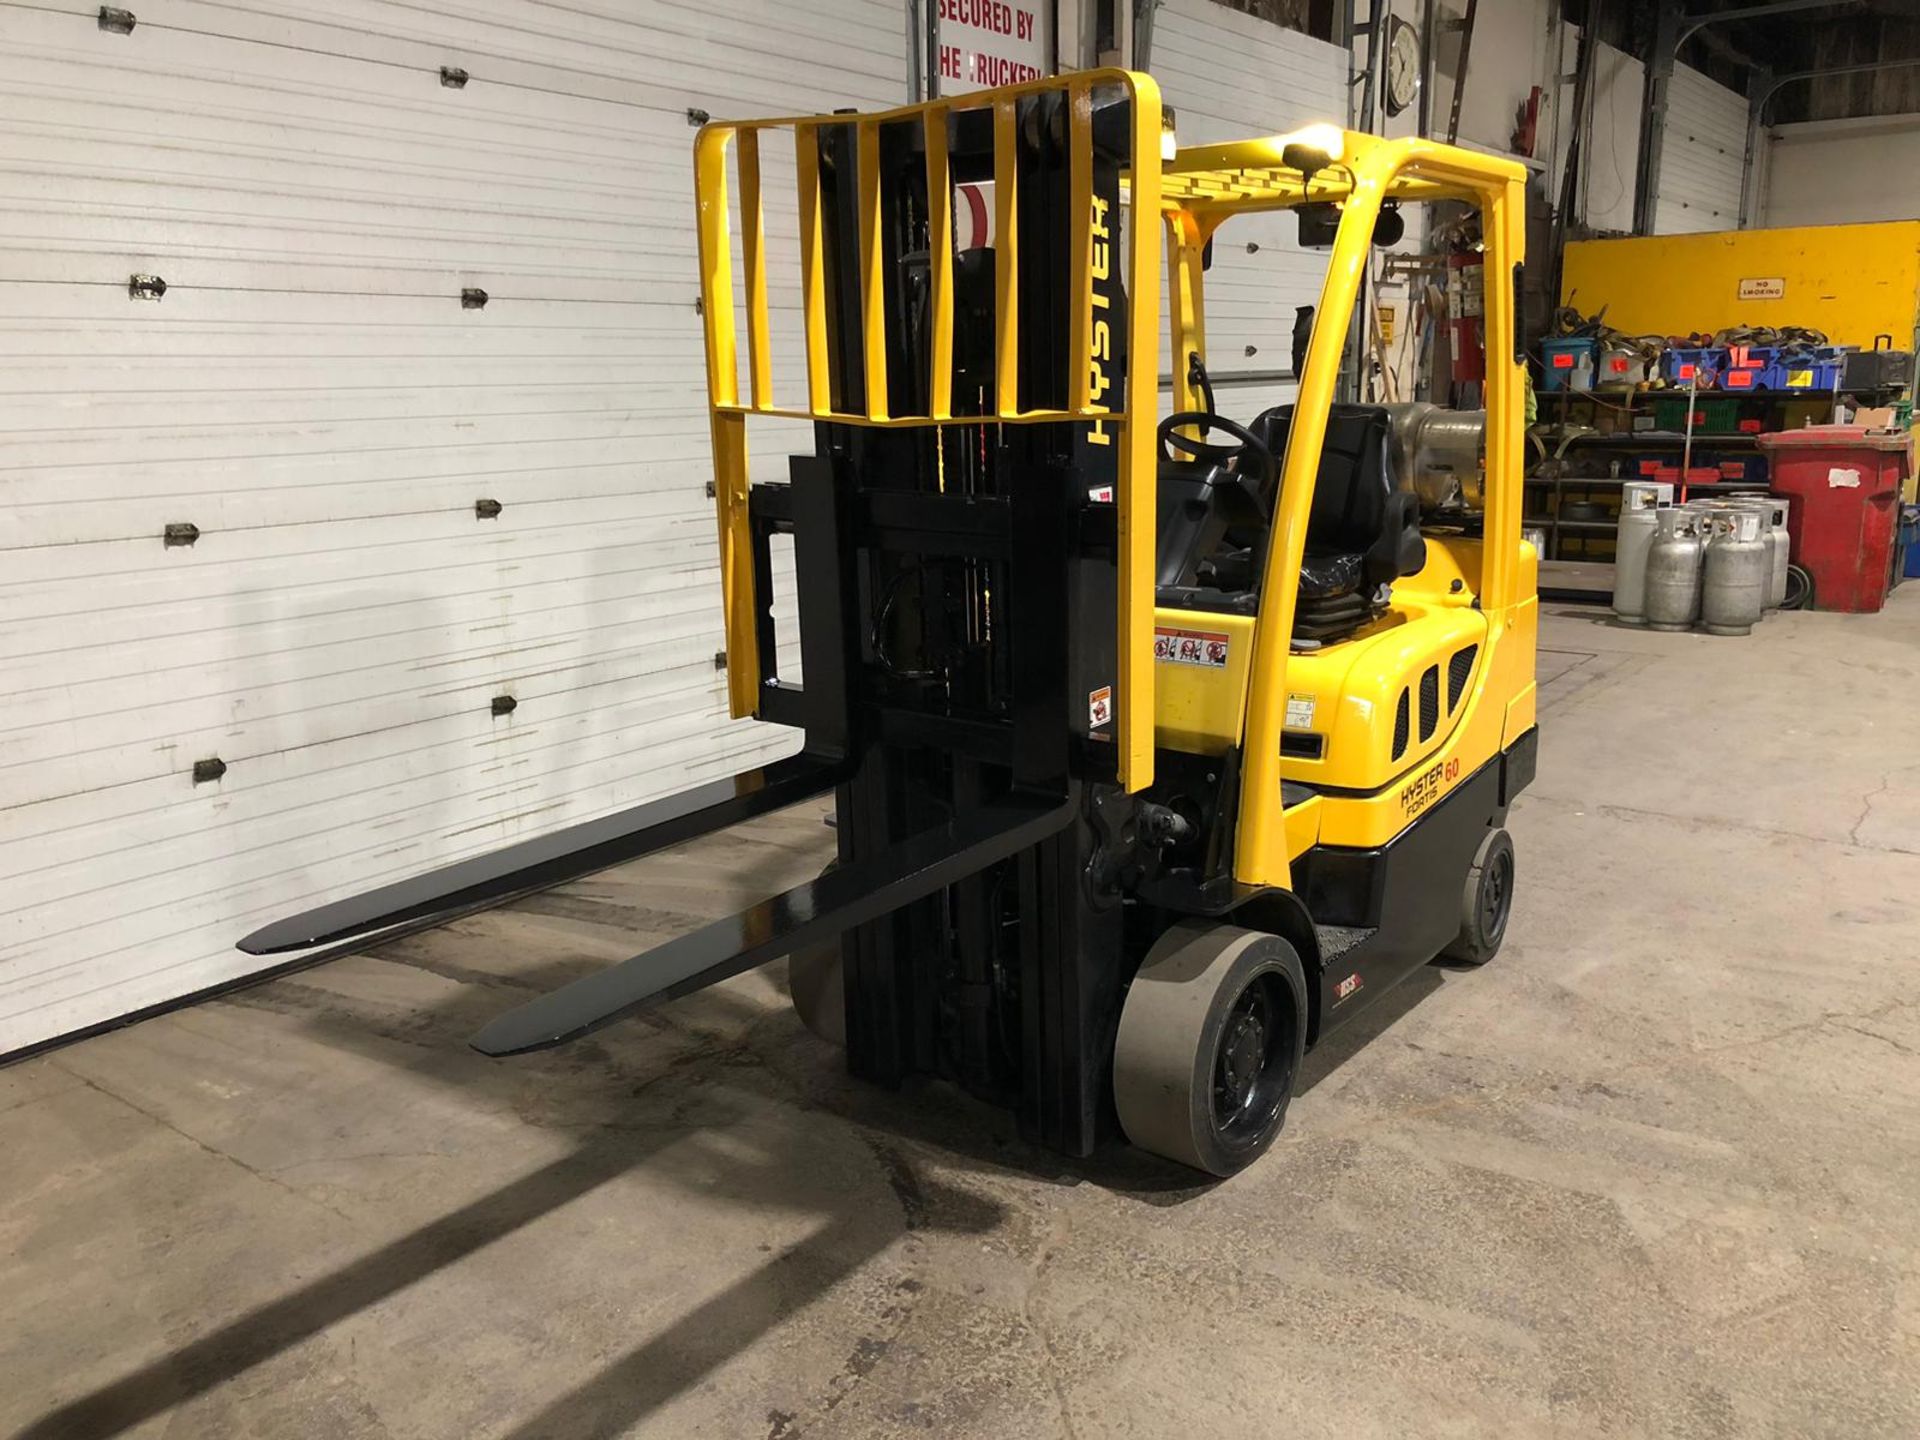 NICE 2018 Hyster model 60 - 6,000lbs Capacity LPG (propane) Forklift with Sideshift - 3-stage mast - - Image 3 of 6